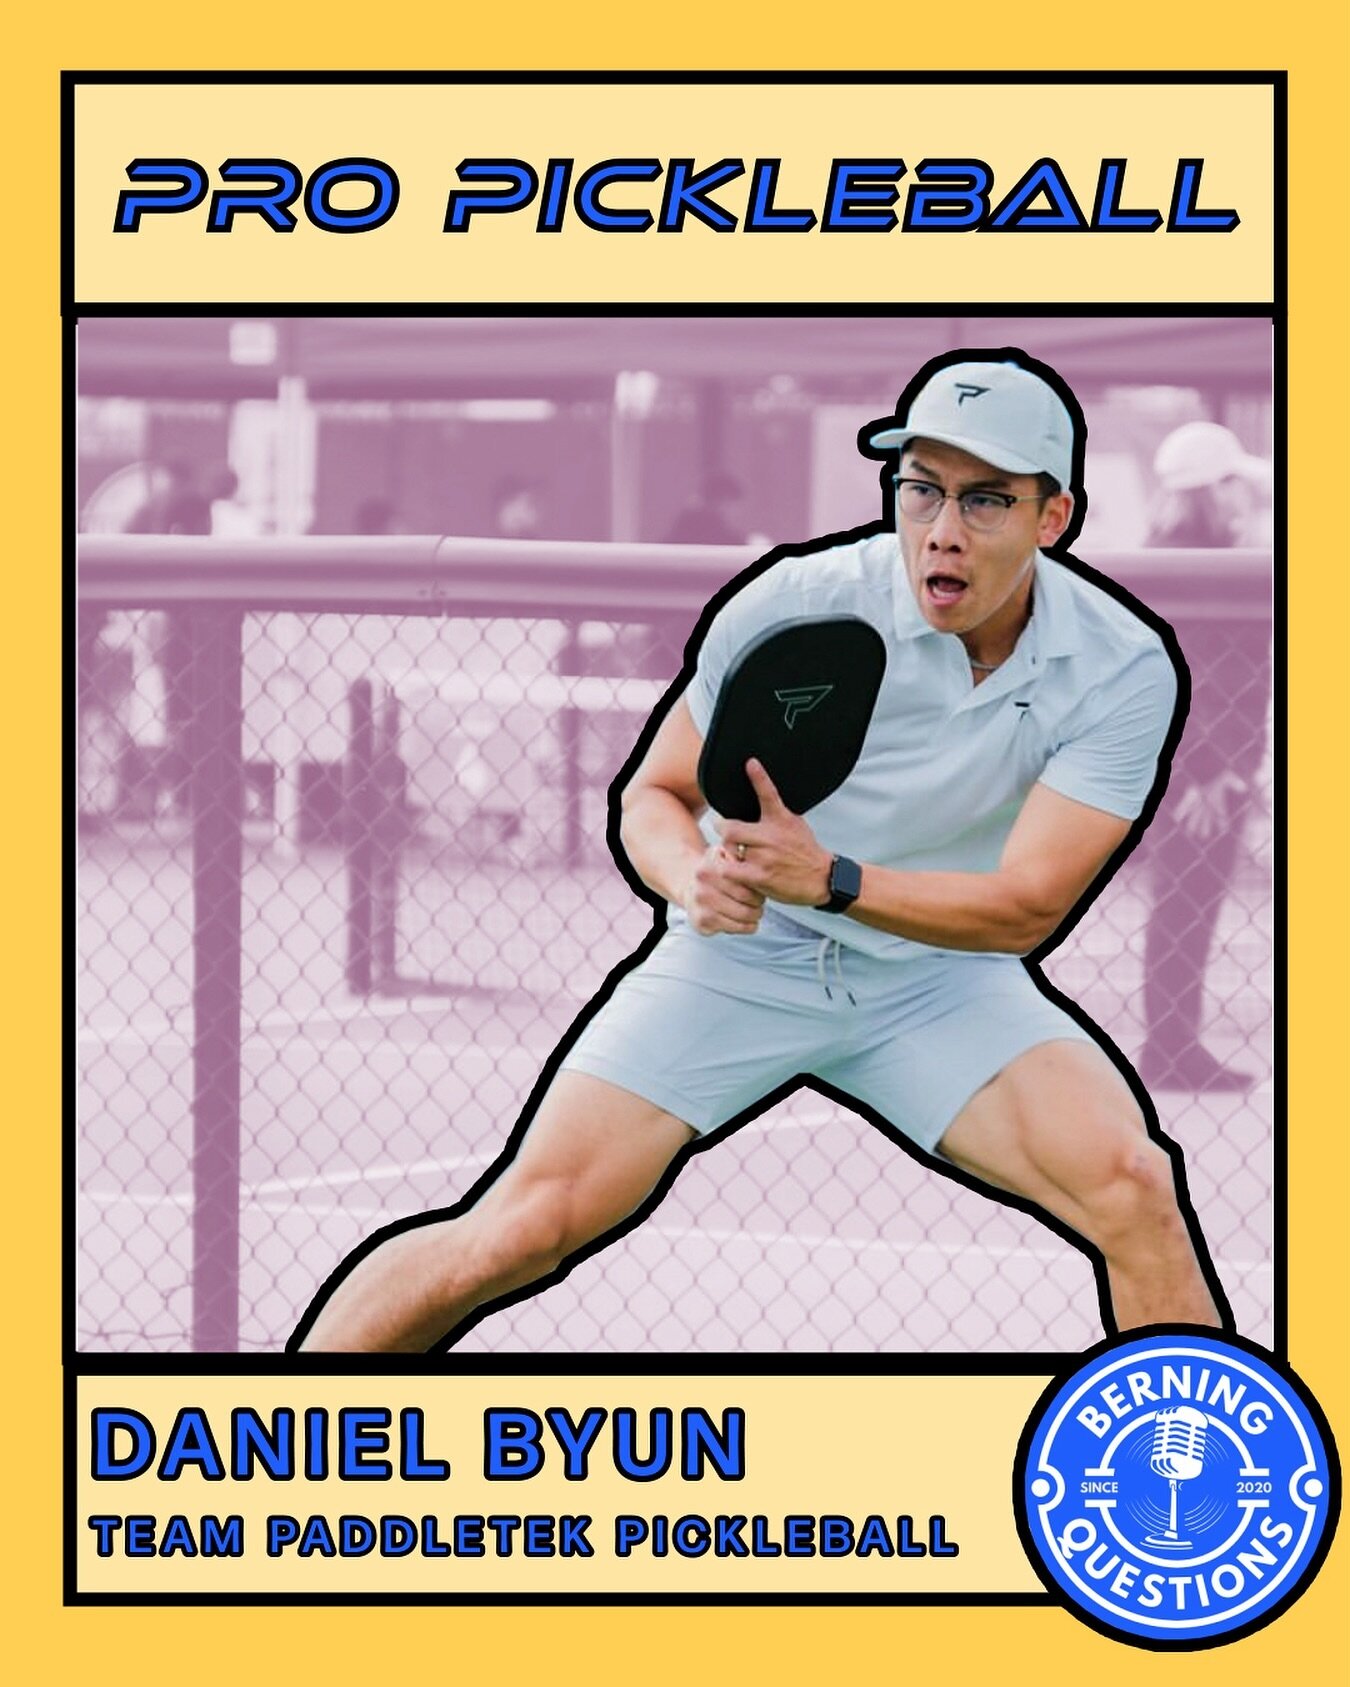 Meet Daniel Byun 🤝🏻

@dbpickleball is a professional Pickleball player, part of team @paddletekpickleball and a day one Berning Questions supporter. 

Join us in cheering on Byun just as much as he&rsquo;s cheered on us. We&rsquo;re hyped to featur